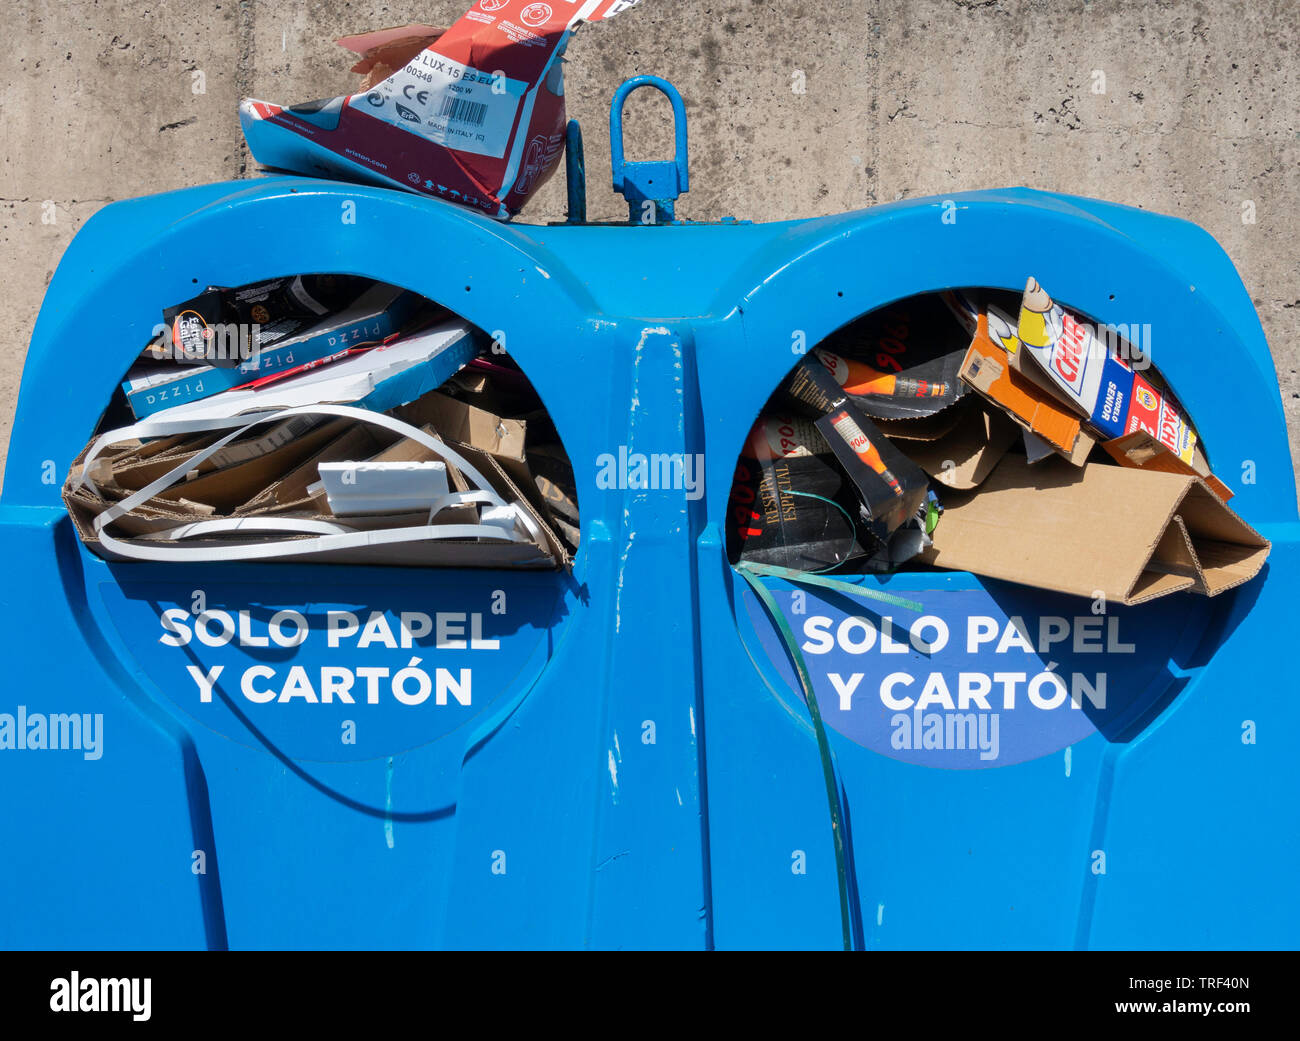 Solo papel y carton (only paper and carton) recycling container for public use in street in Spain. Stock Photo